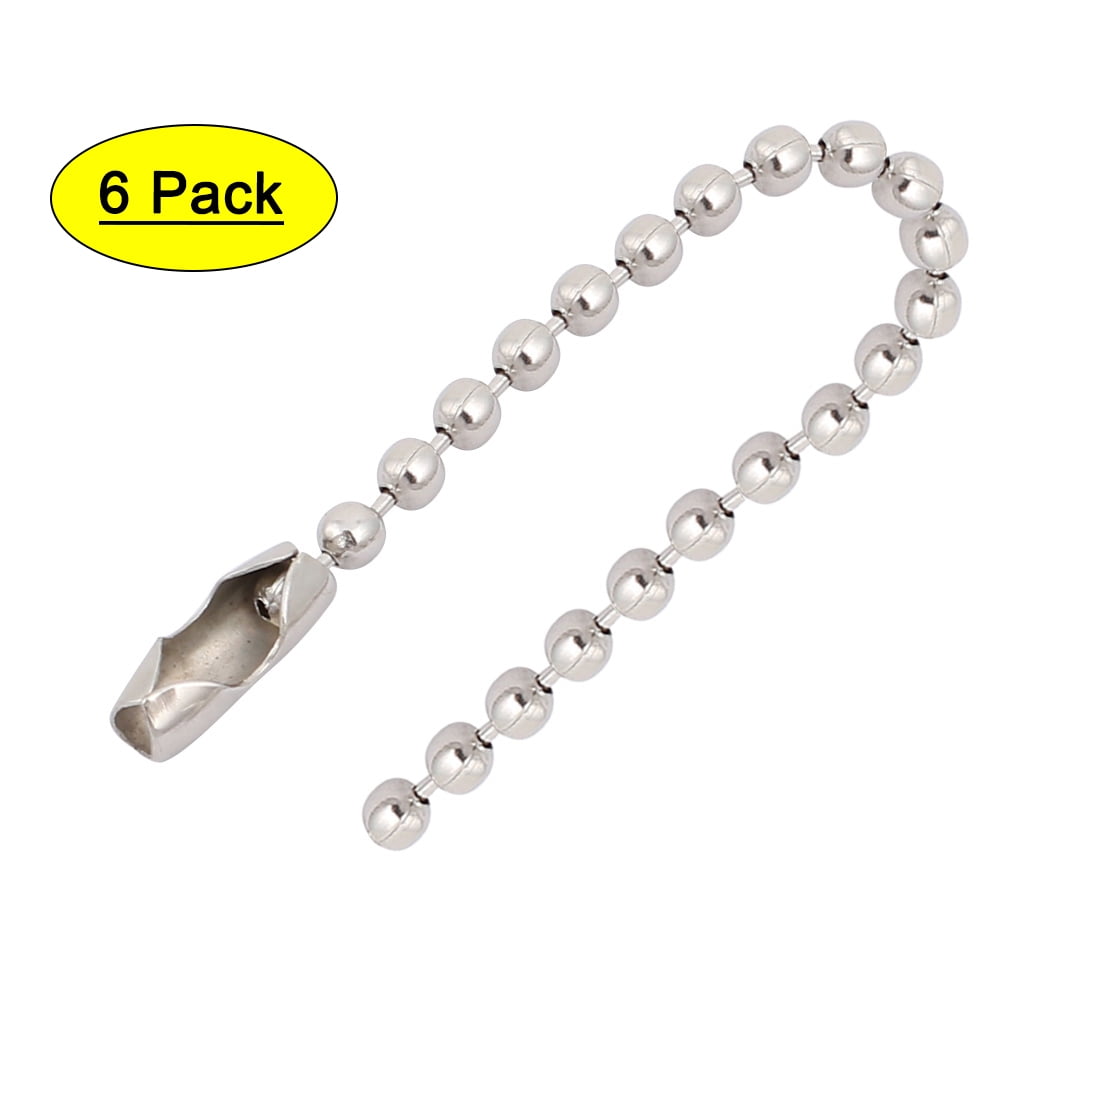 10Pcs Stainless Steel Clasp Chain Ball Keychain Silver Tone 1.5mm Dia 6cm Length 